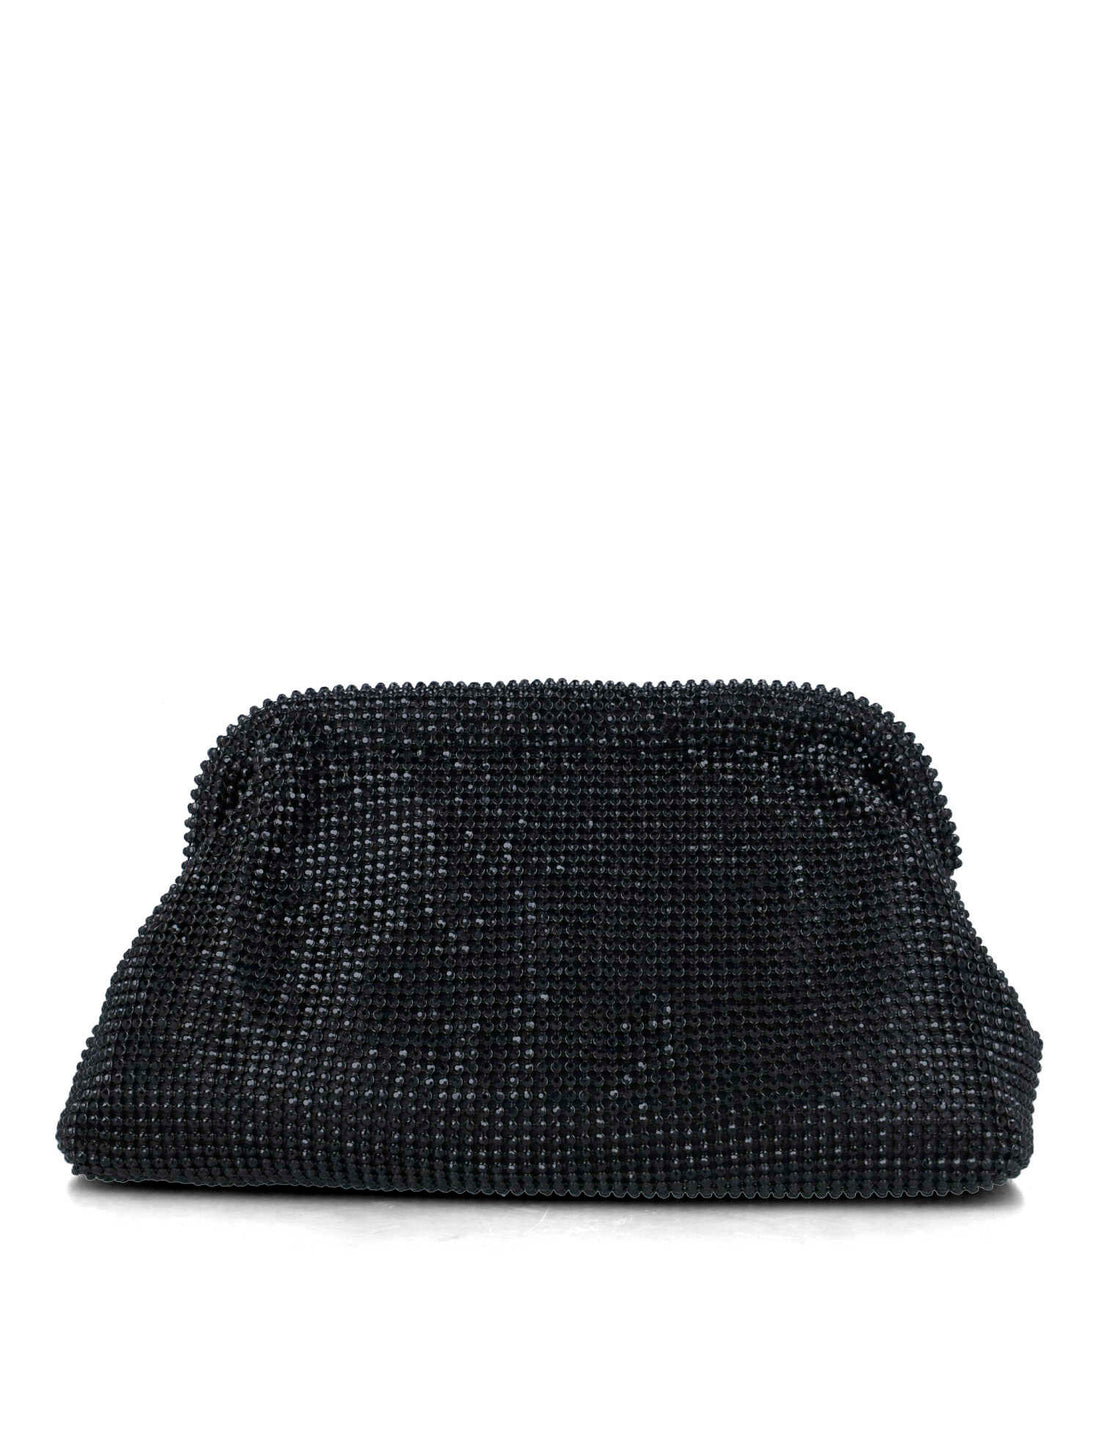 Black Pouch Bag With All Over Embellishment_85681_01_01